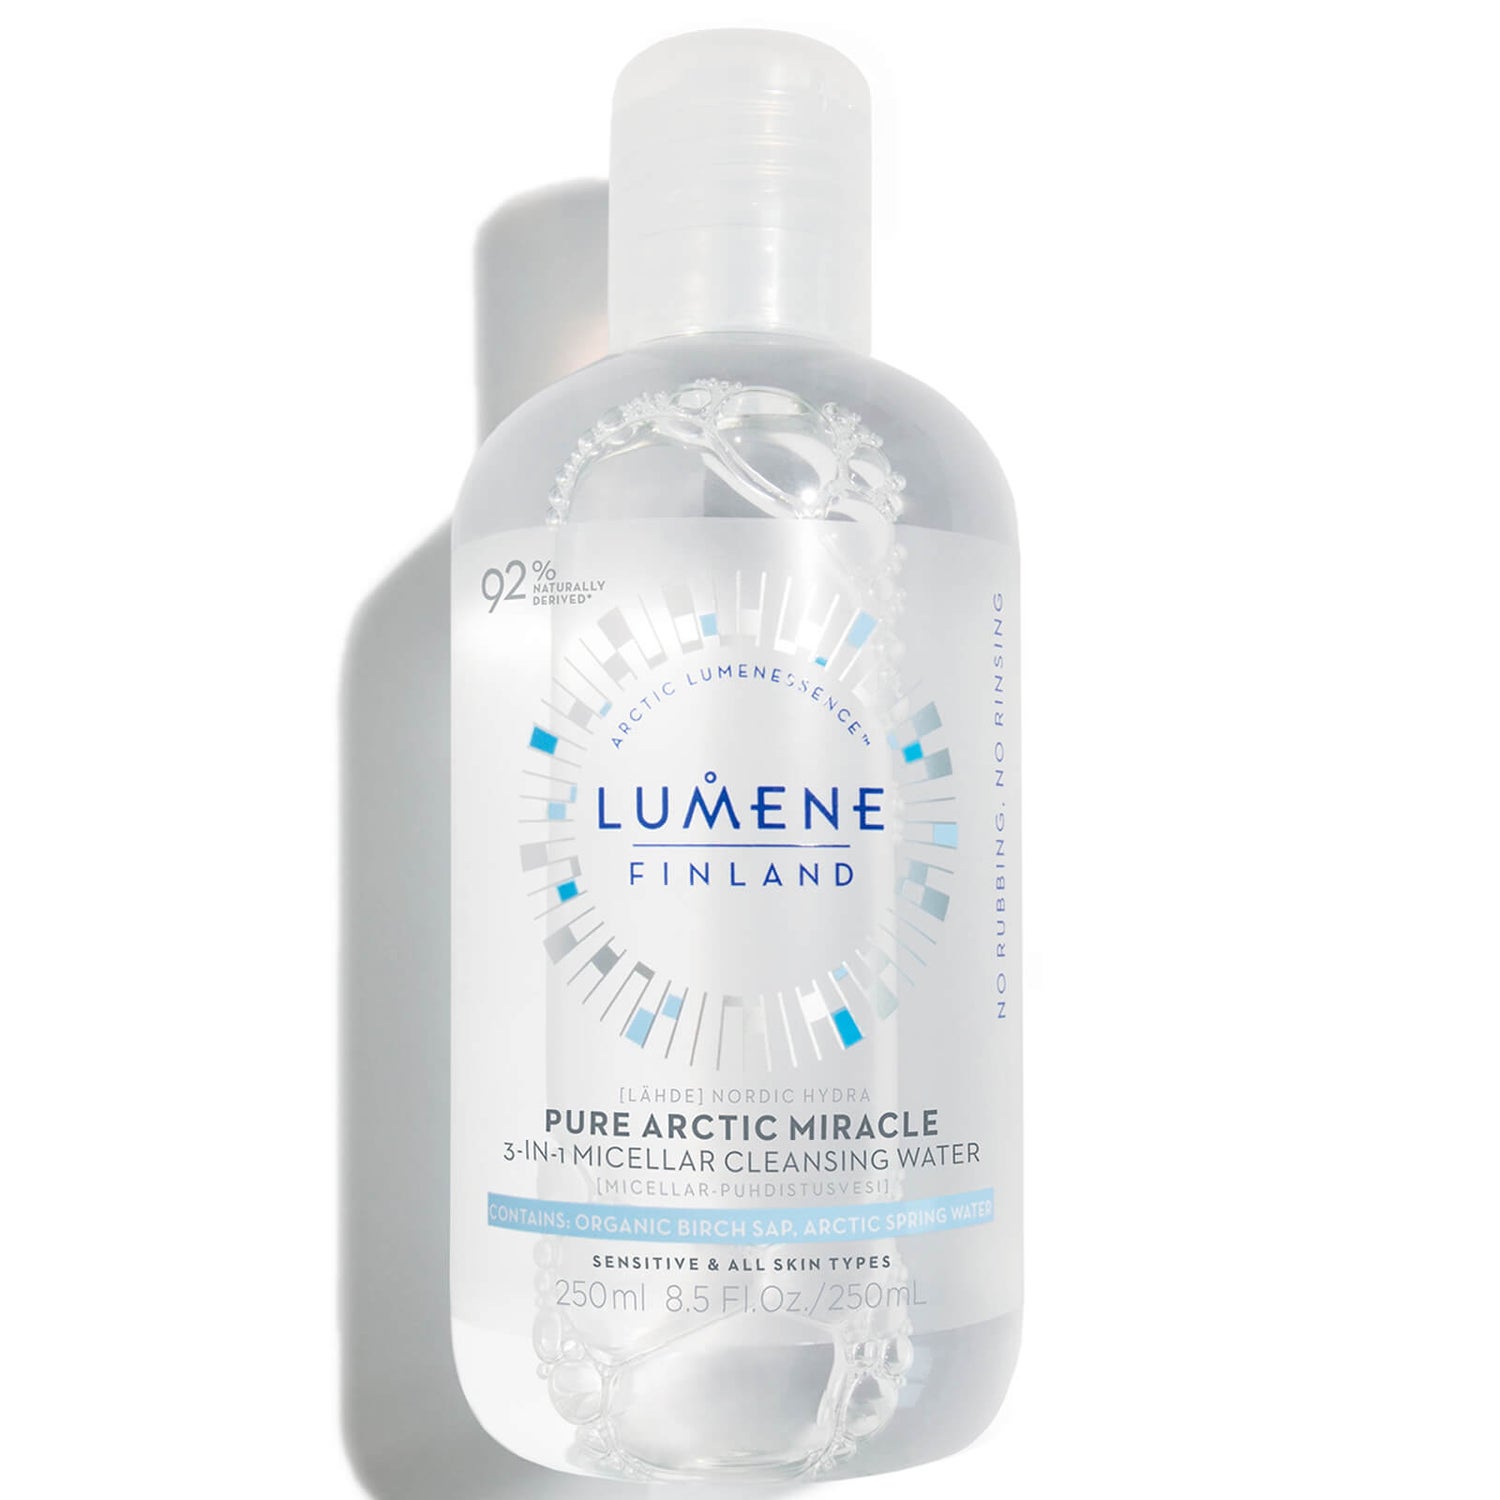 Lumene Nordic Hydra [Lähde] Pure Arctic Miracle 3-In-1 Micellar Cleansing Water 250ml